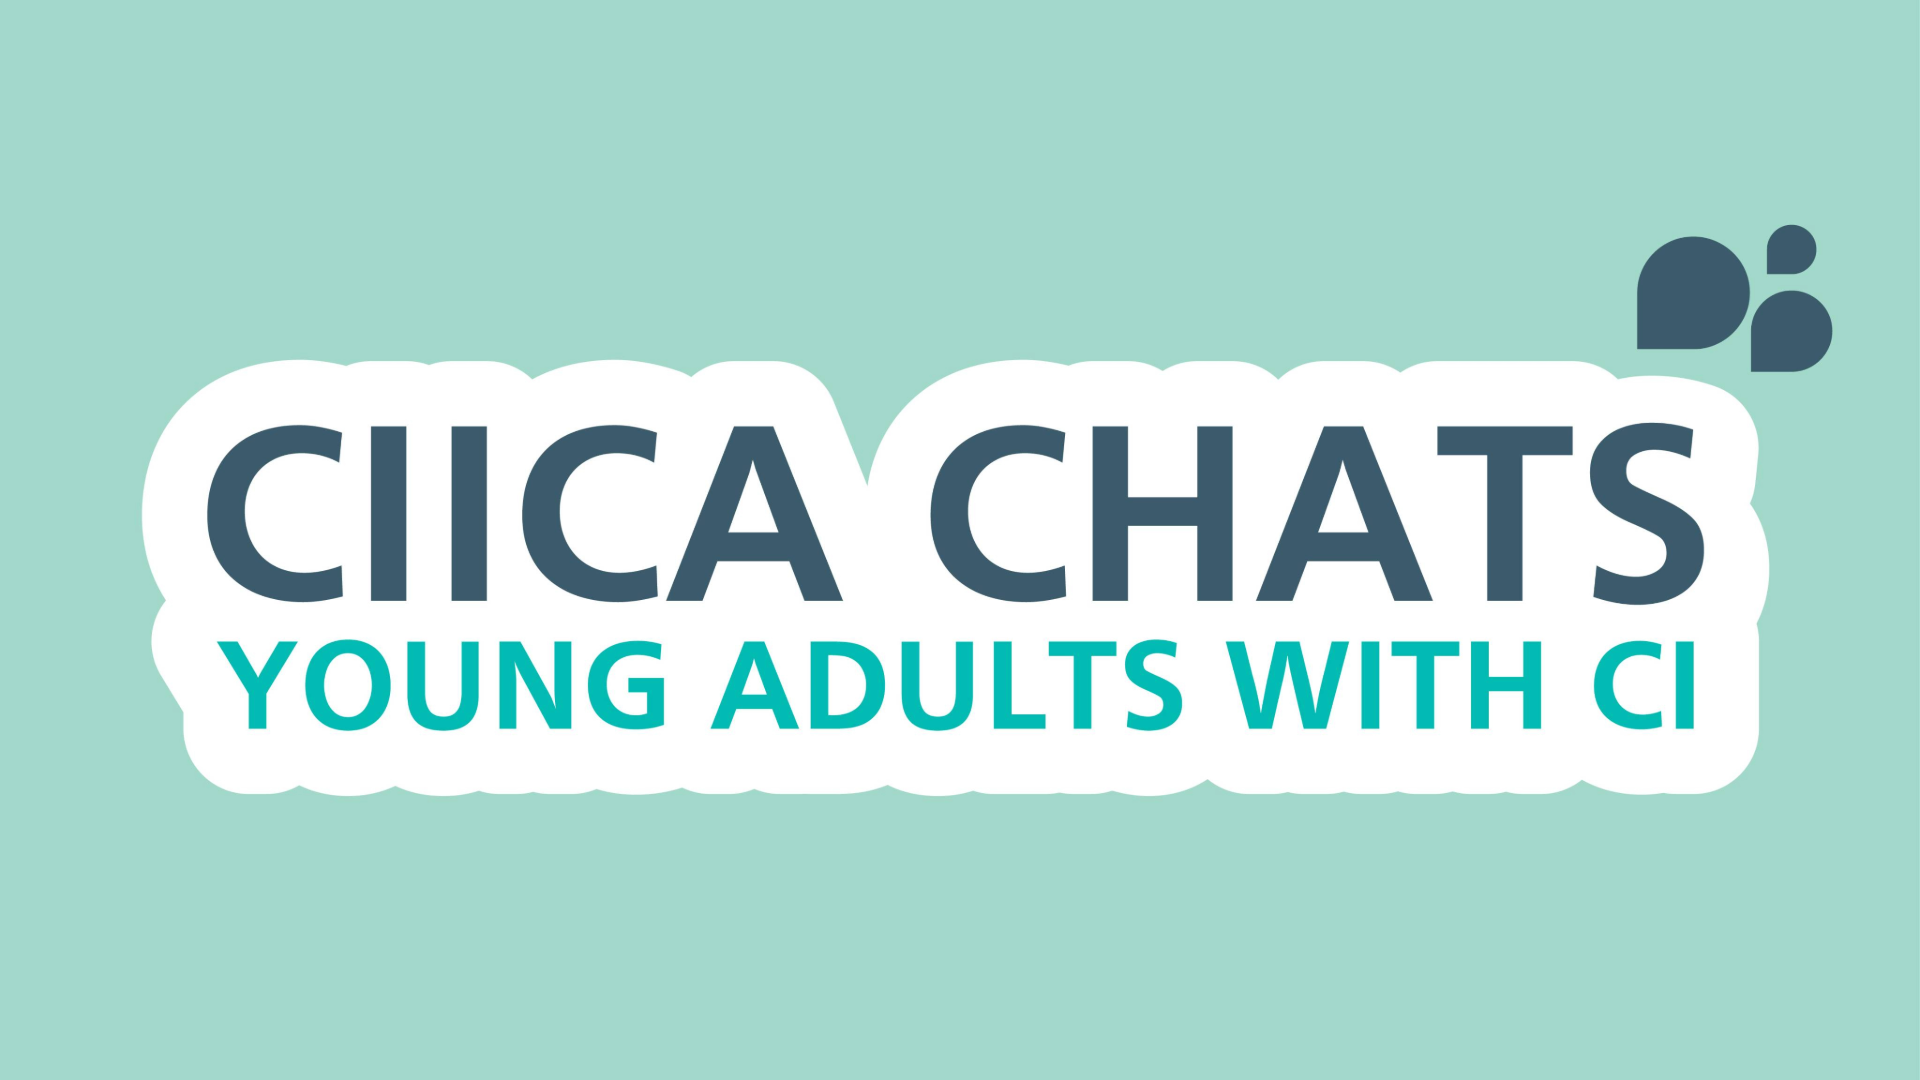 CIICA CHATS: Young Adults with CI